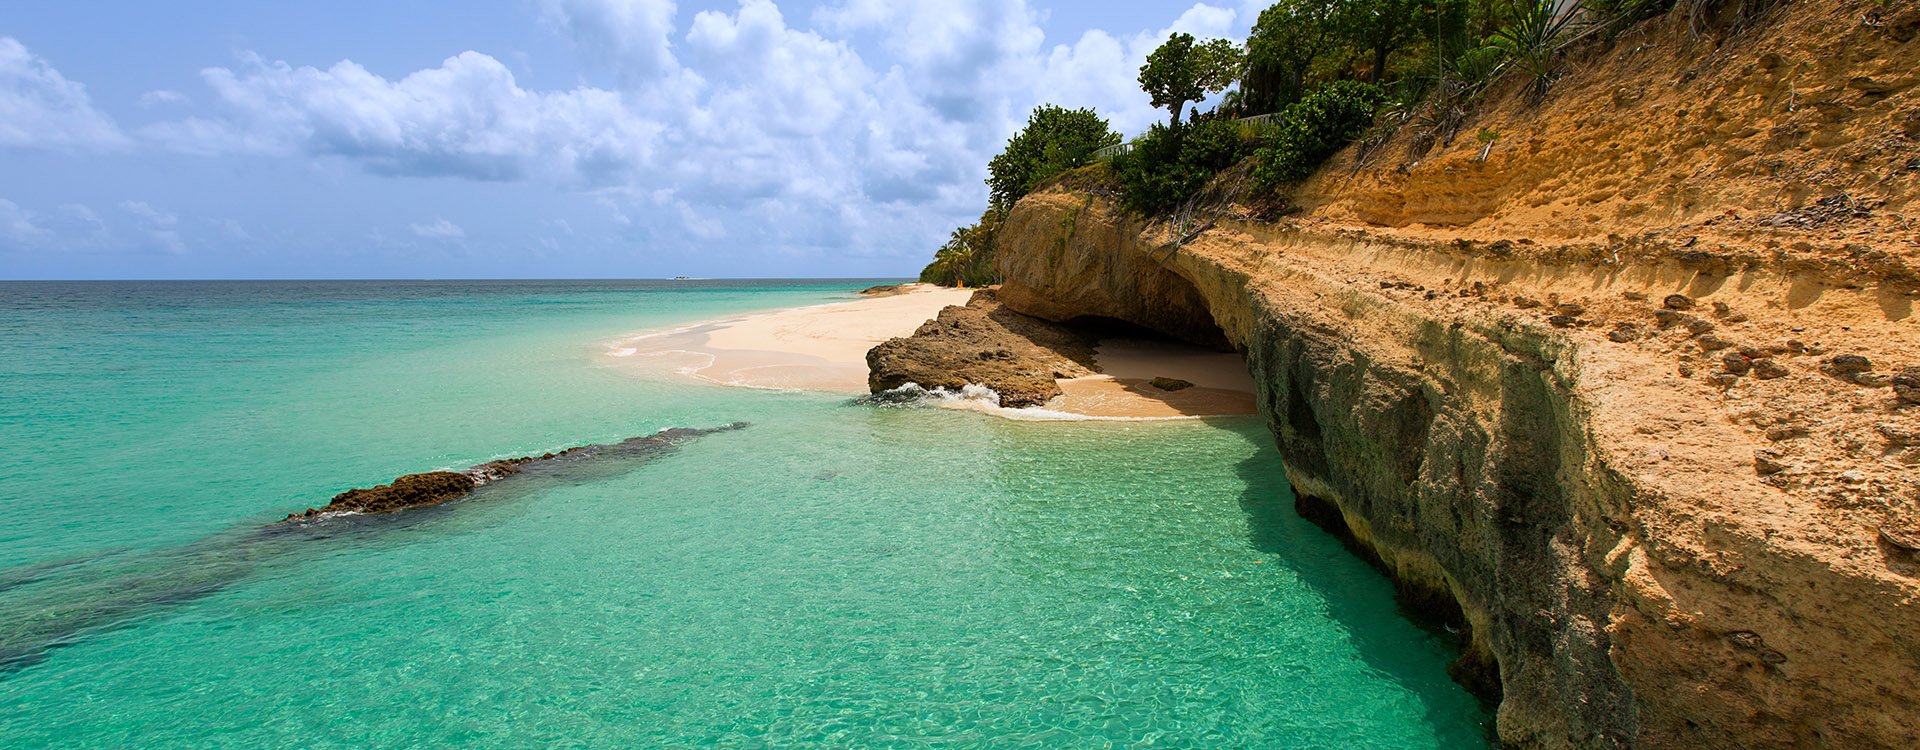 view of rugged rocky coast at anguilla island, caribbean, with turquoise water and white sand beach